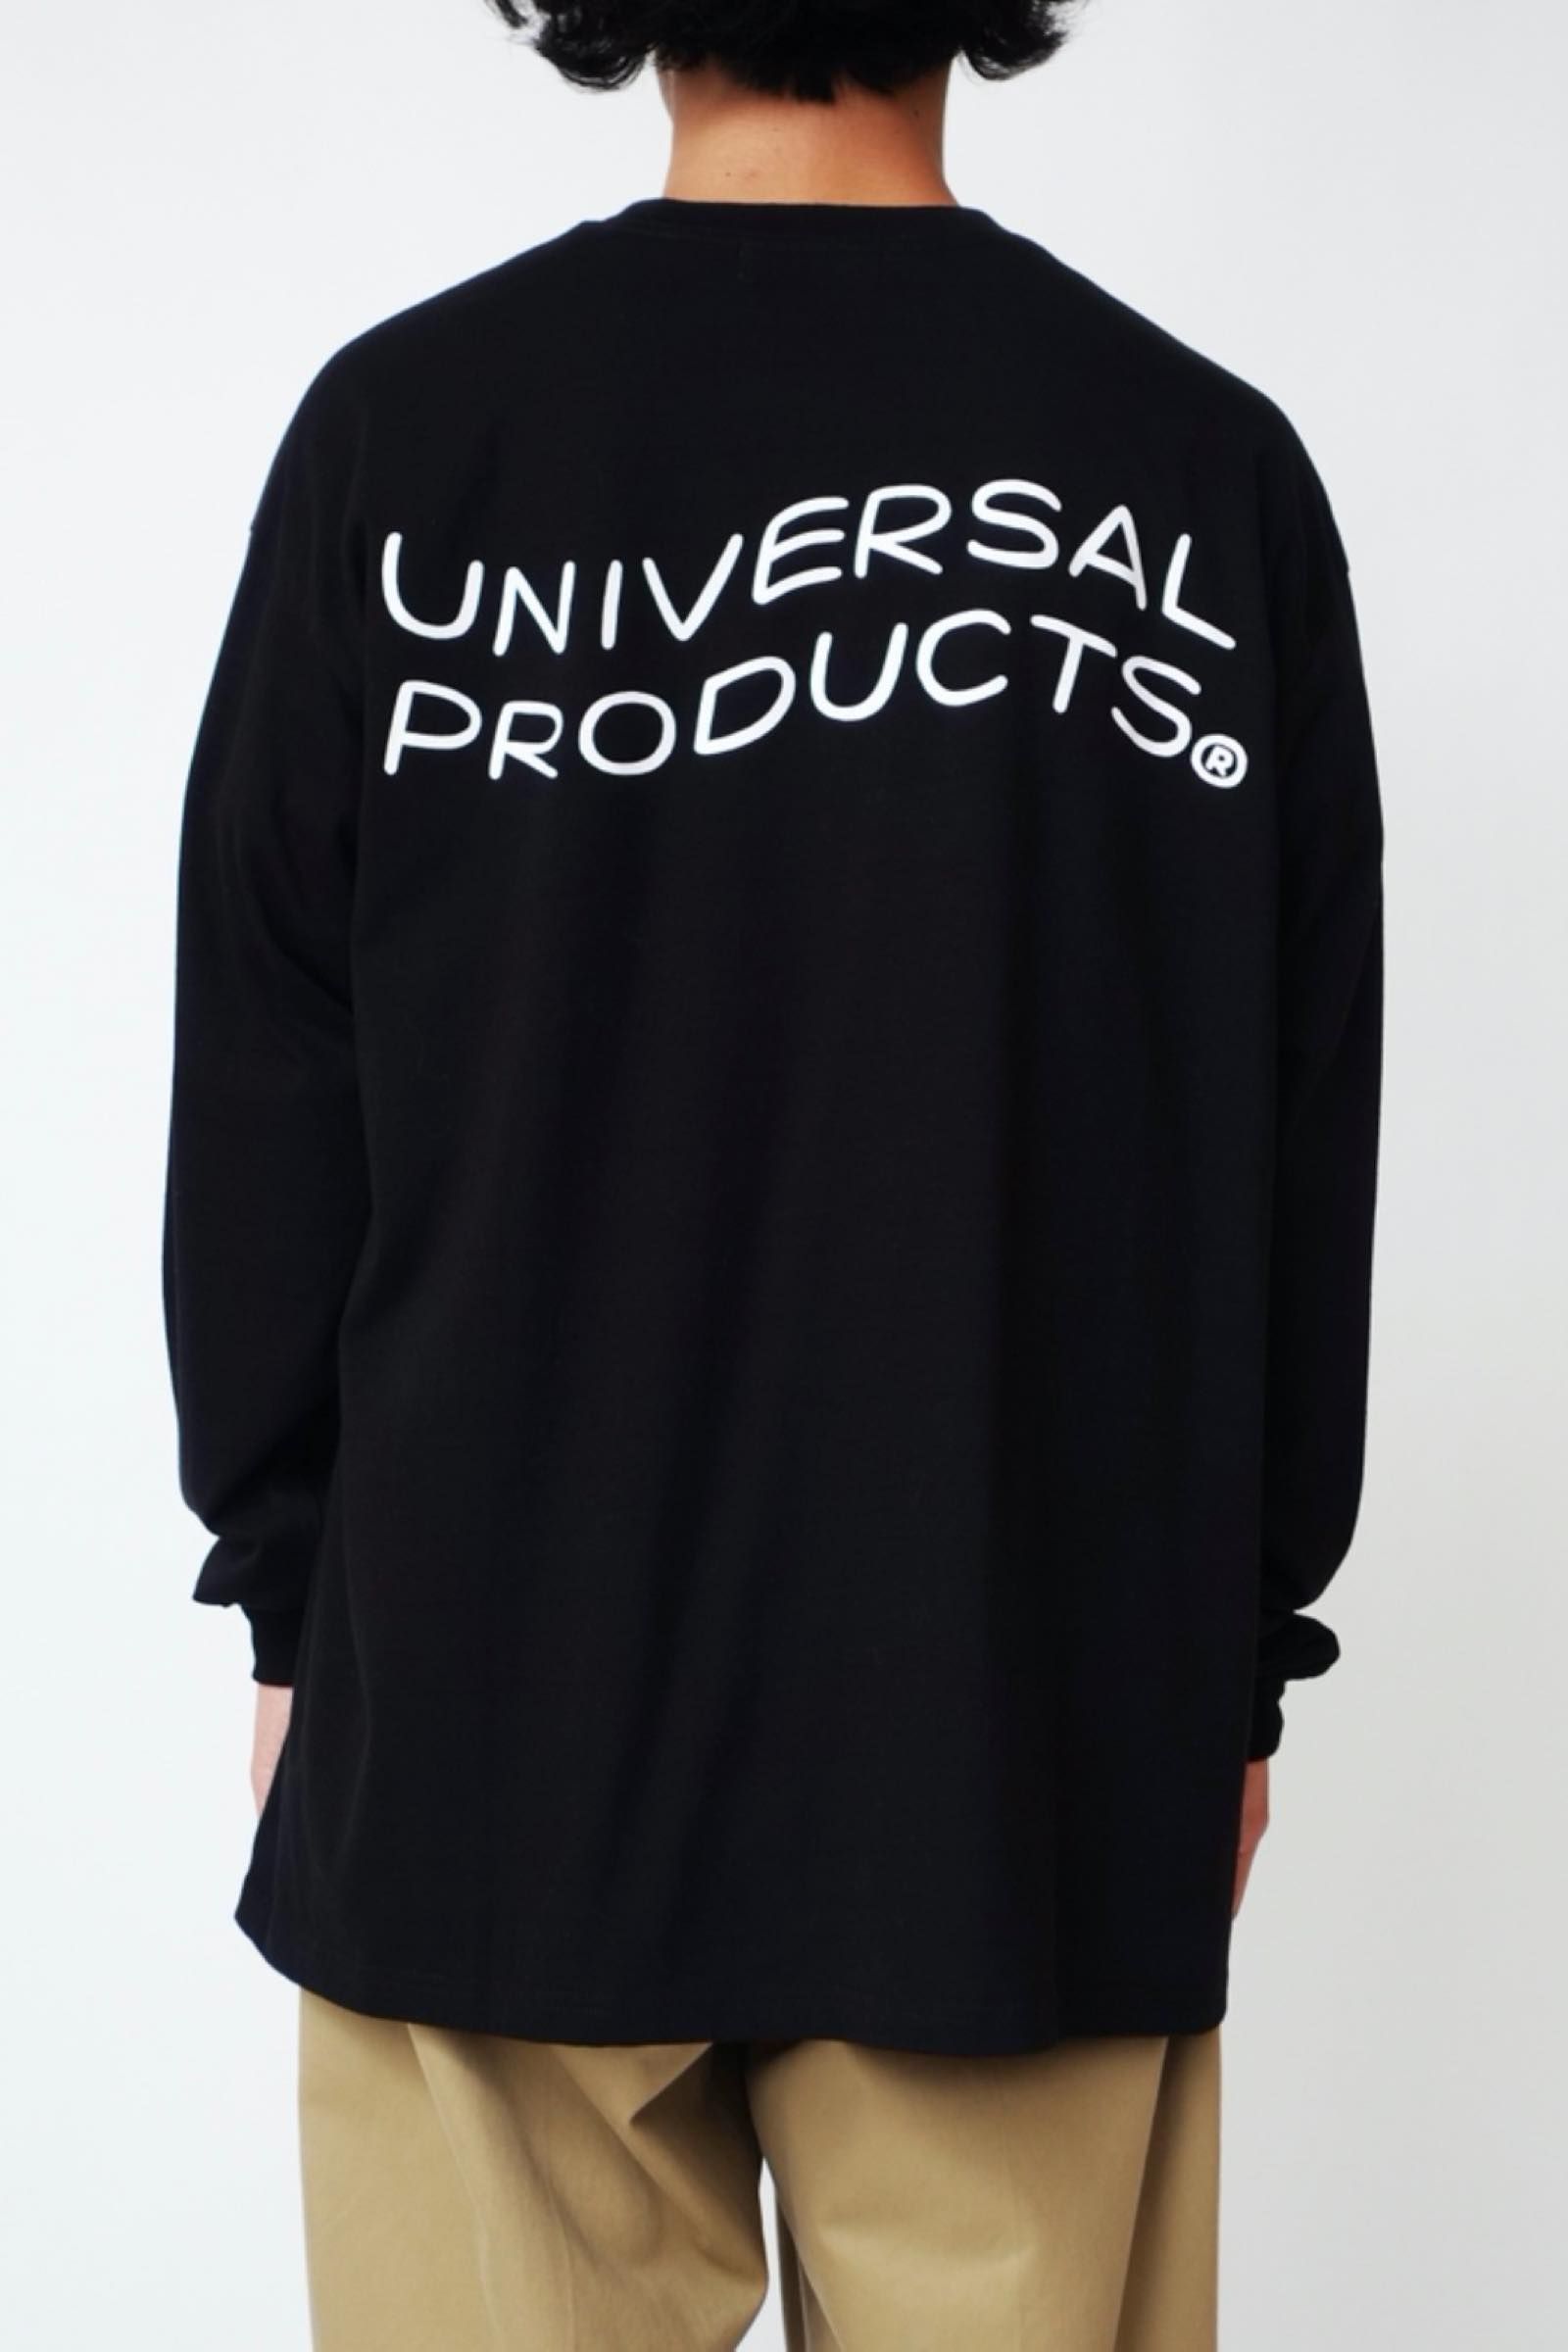 UNIVERSAL PRODUCTS - up+n l/s t-shirt 